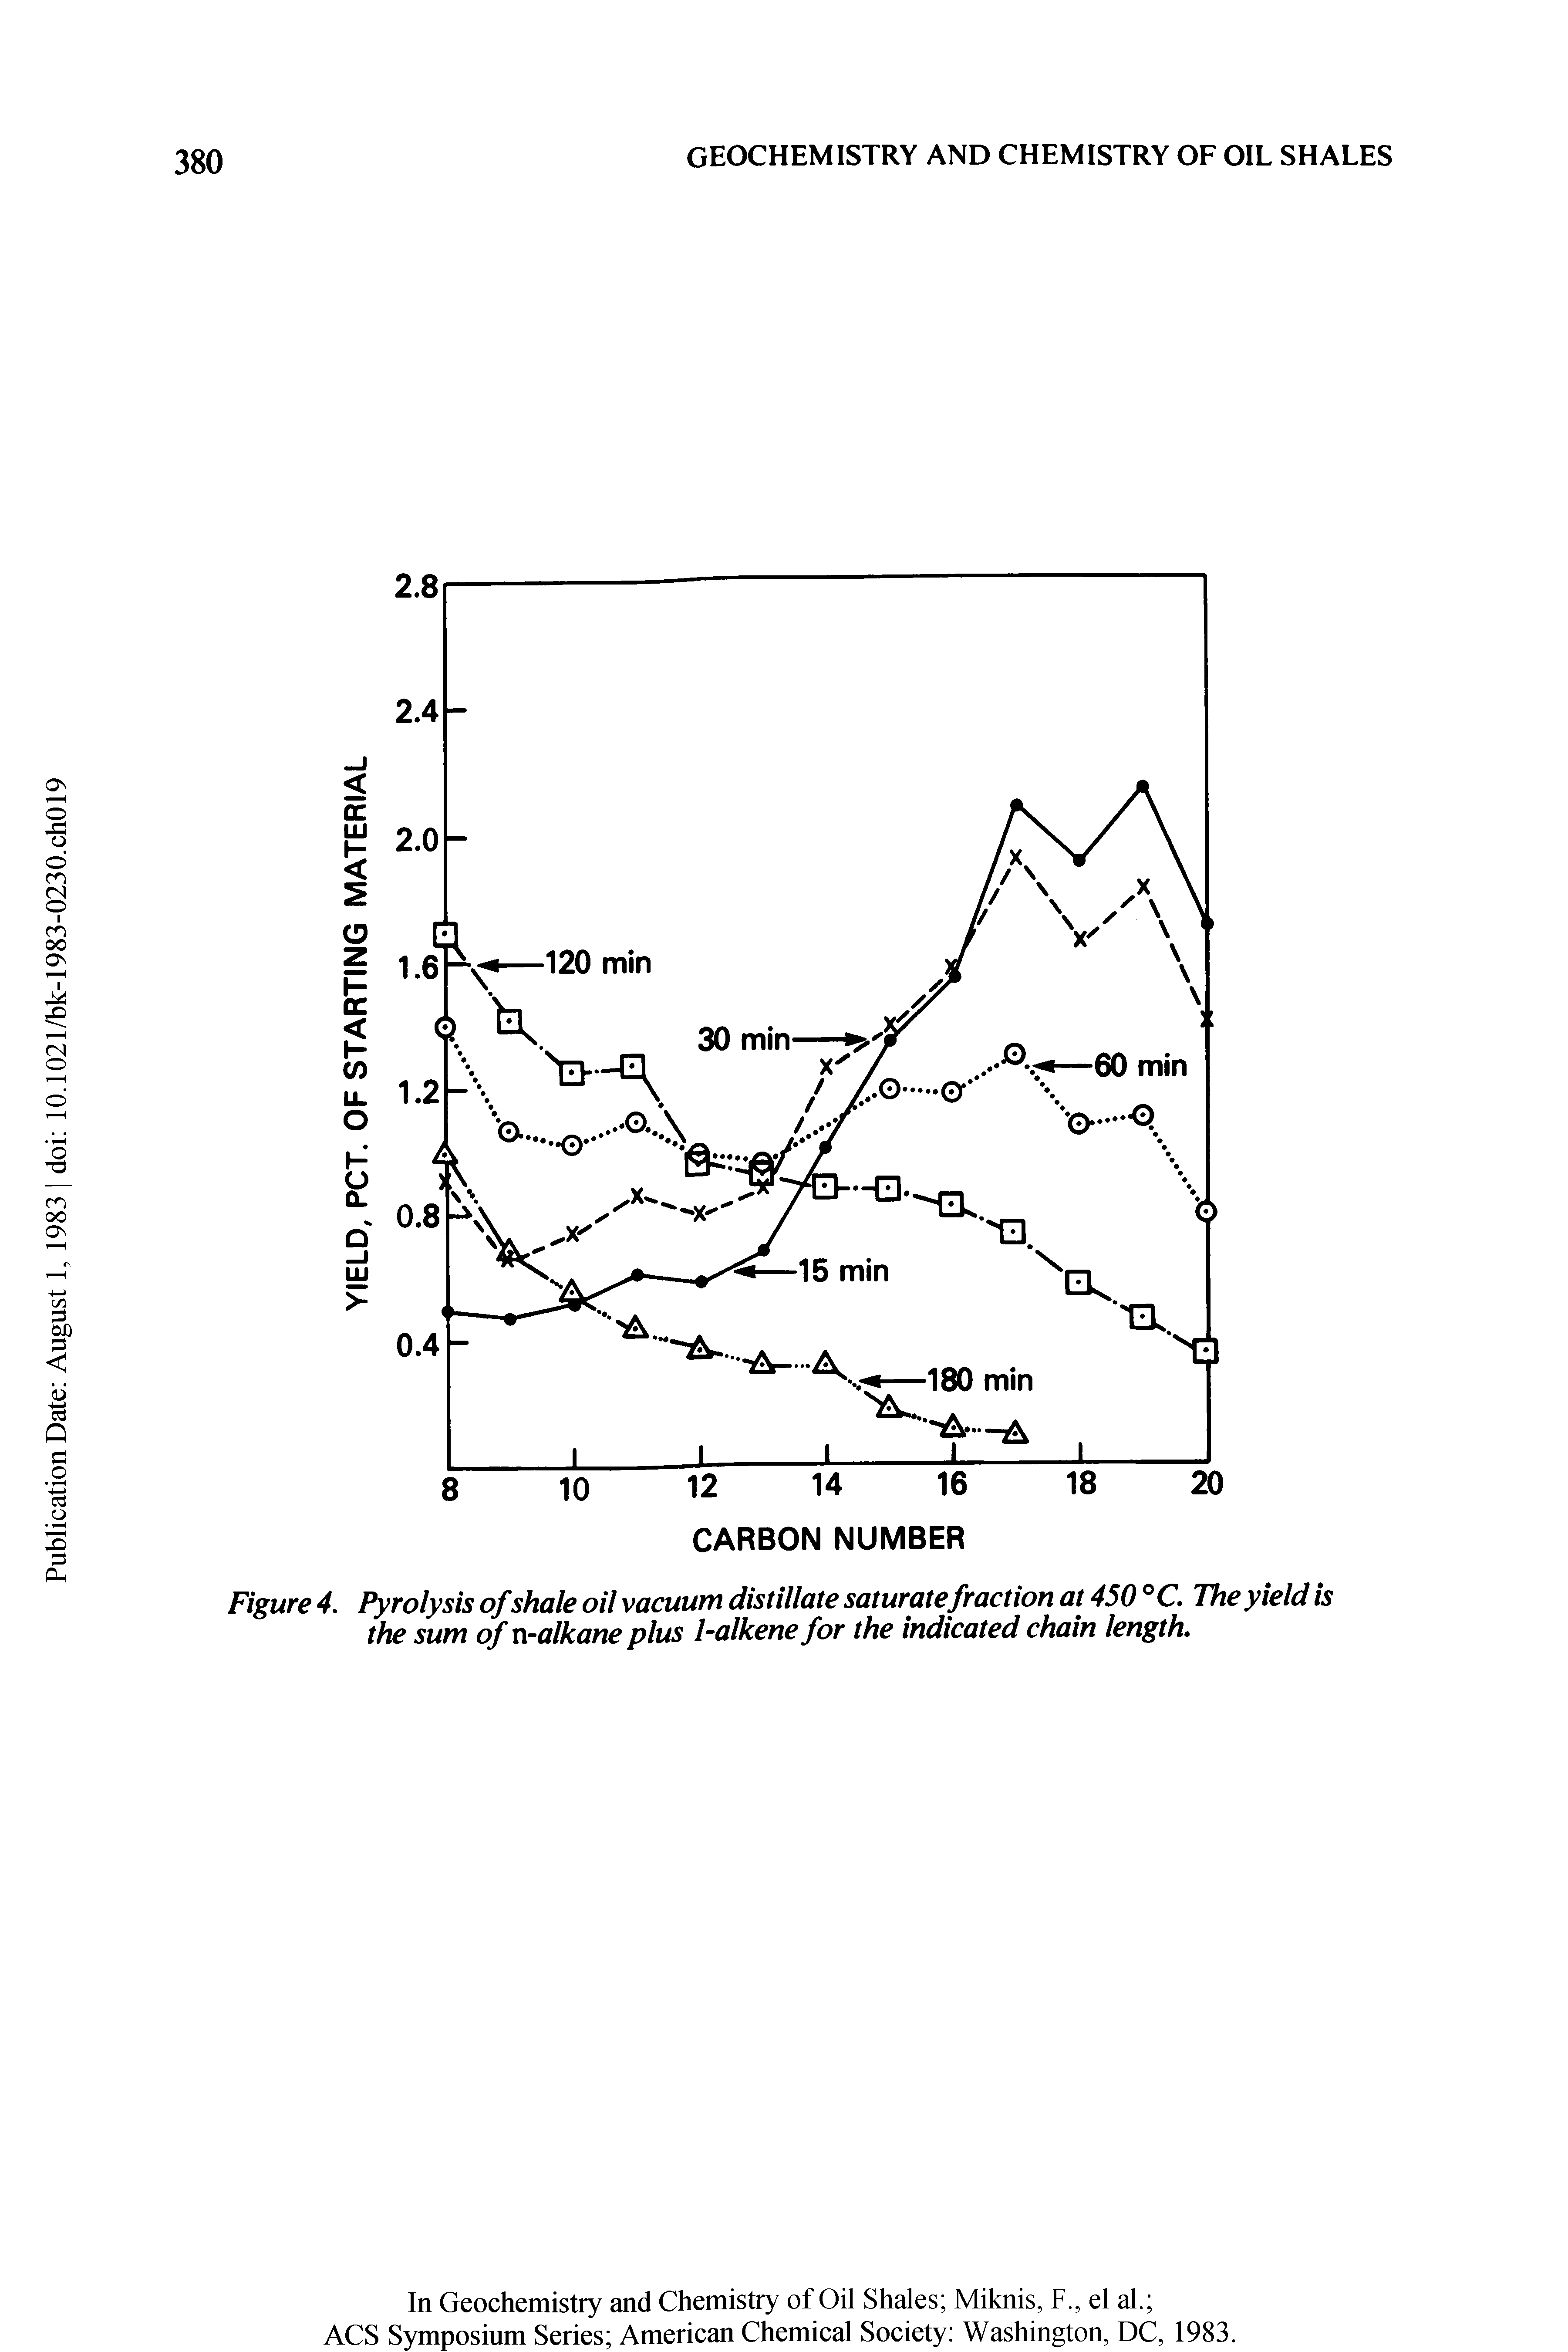 Figure 4. Pyrolysis ofshale oil vacuum distillate saturate fraction at 450 °C. The yield is the sum of n-alkane plus l-alkene for the indicated chain length.